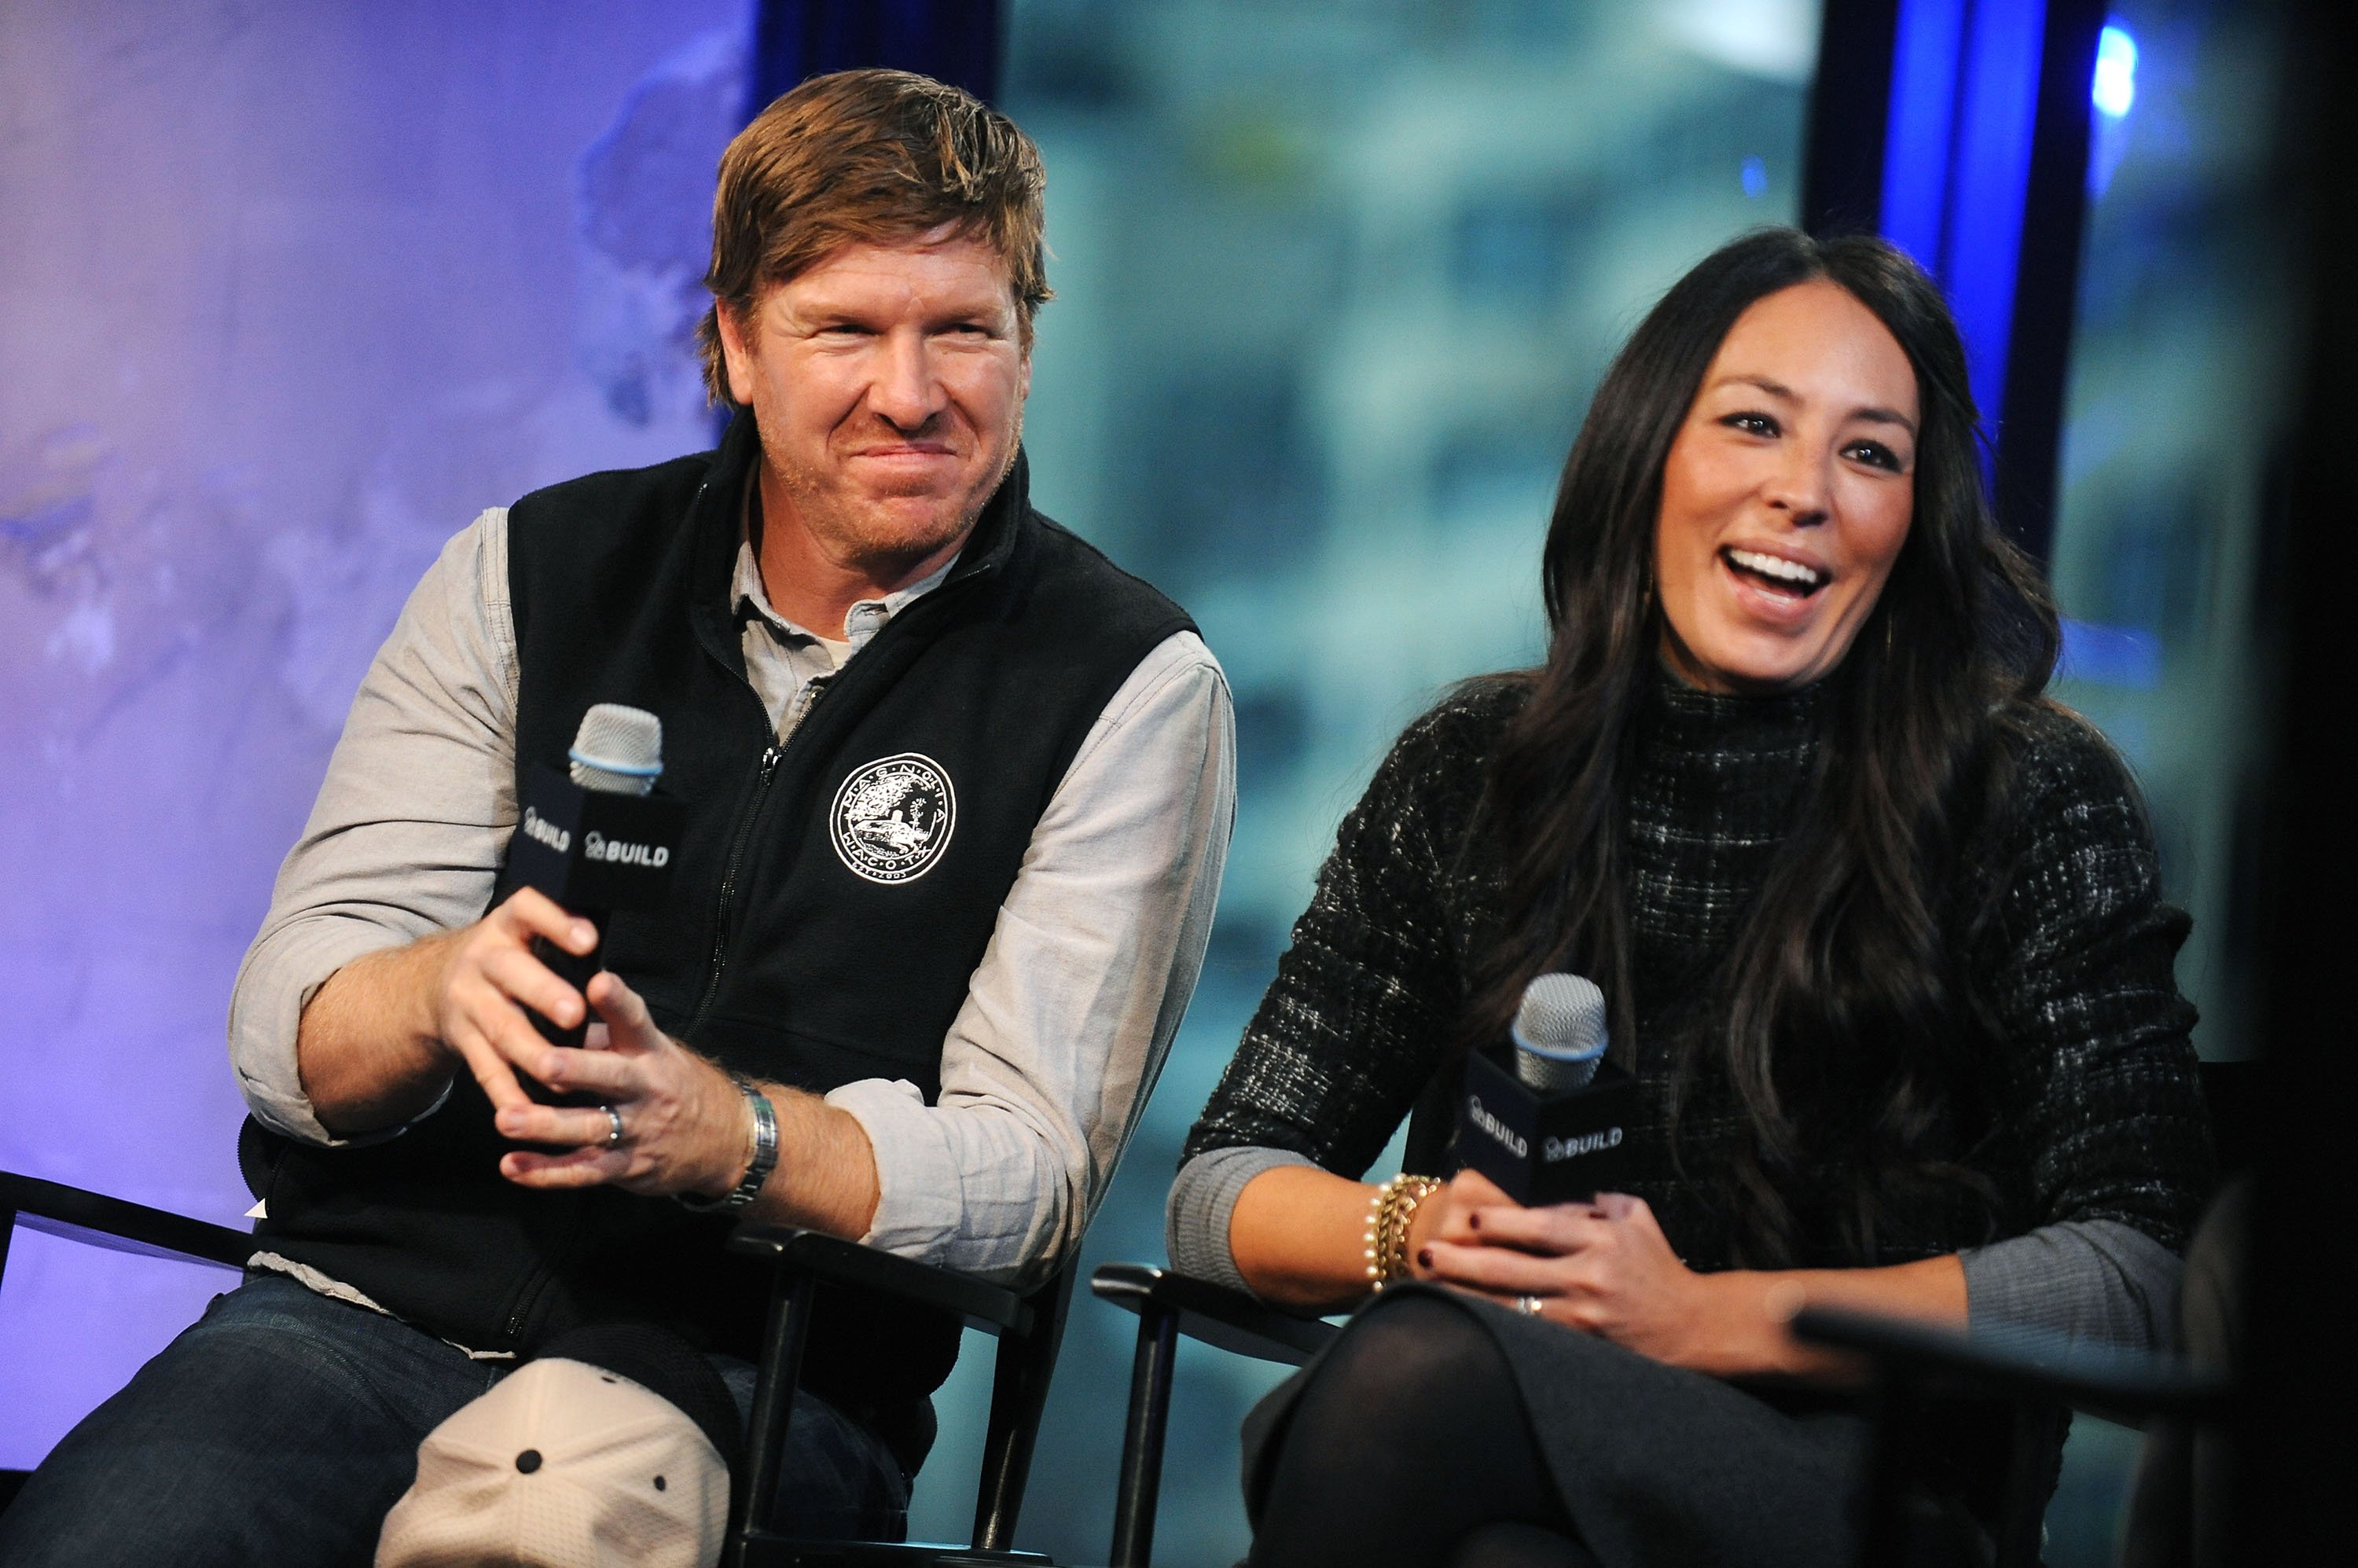 HGTV stars Chip Gaines and Joanna Gaines attend AOL Build Presents: "Fixer Upper" at AOL Studios In New York on December 8, 2015 in New York City | Source: Getty Images